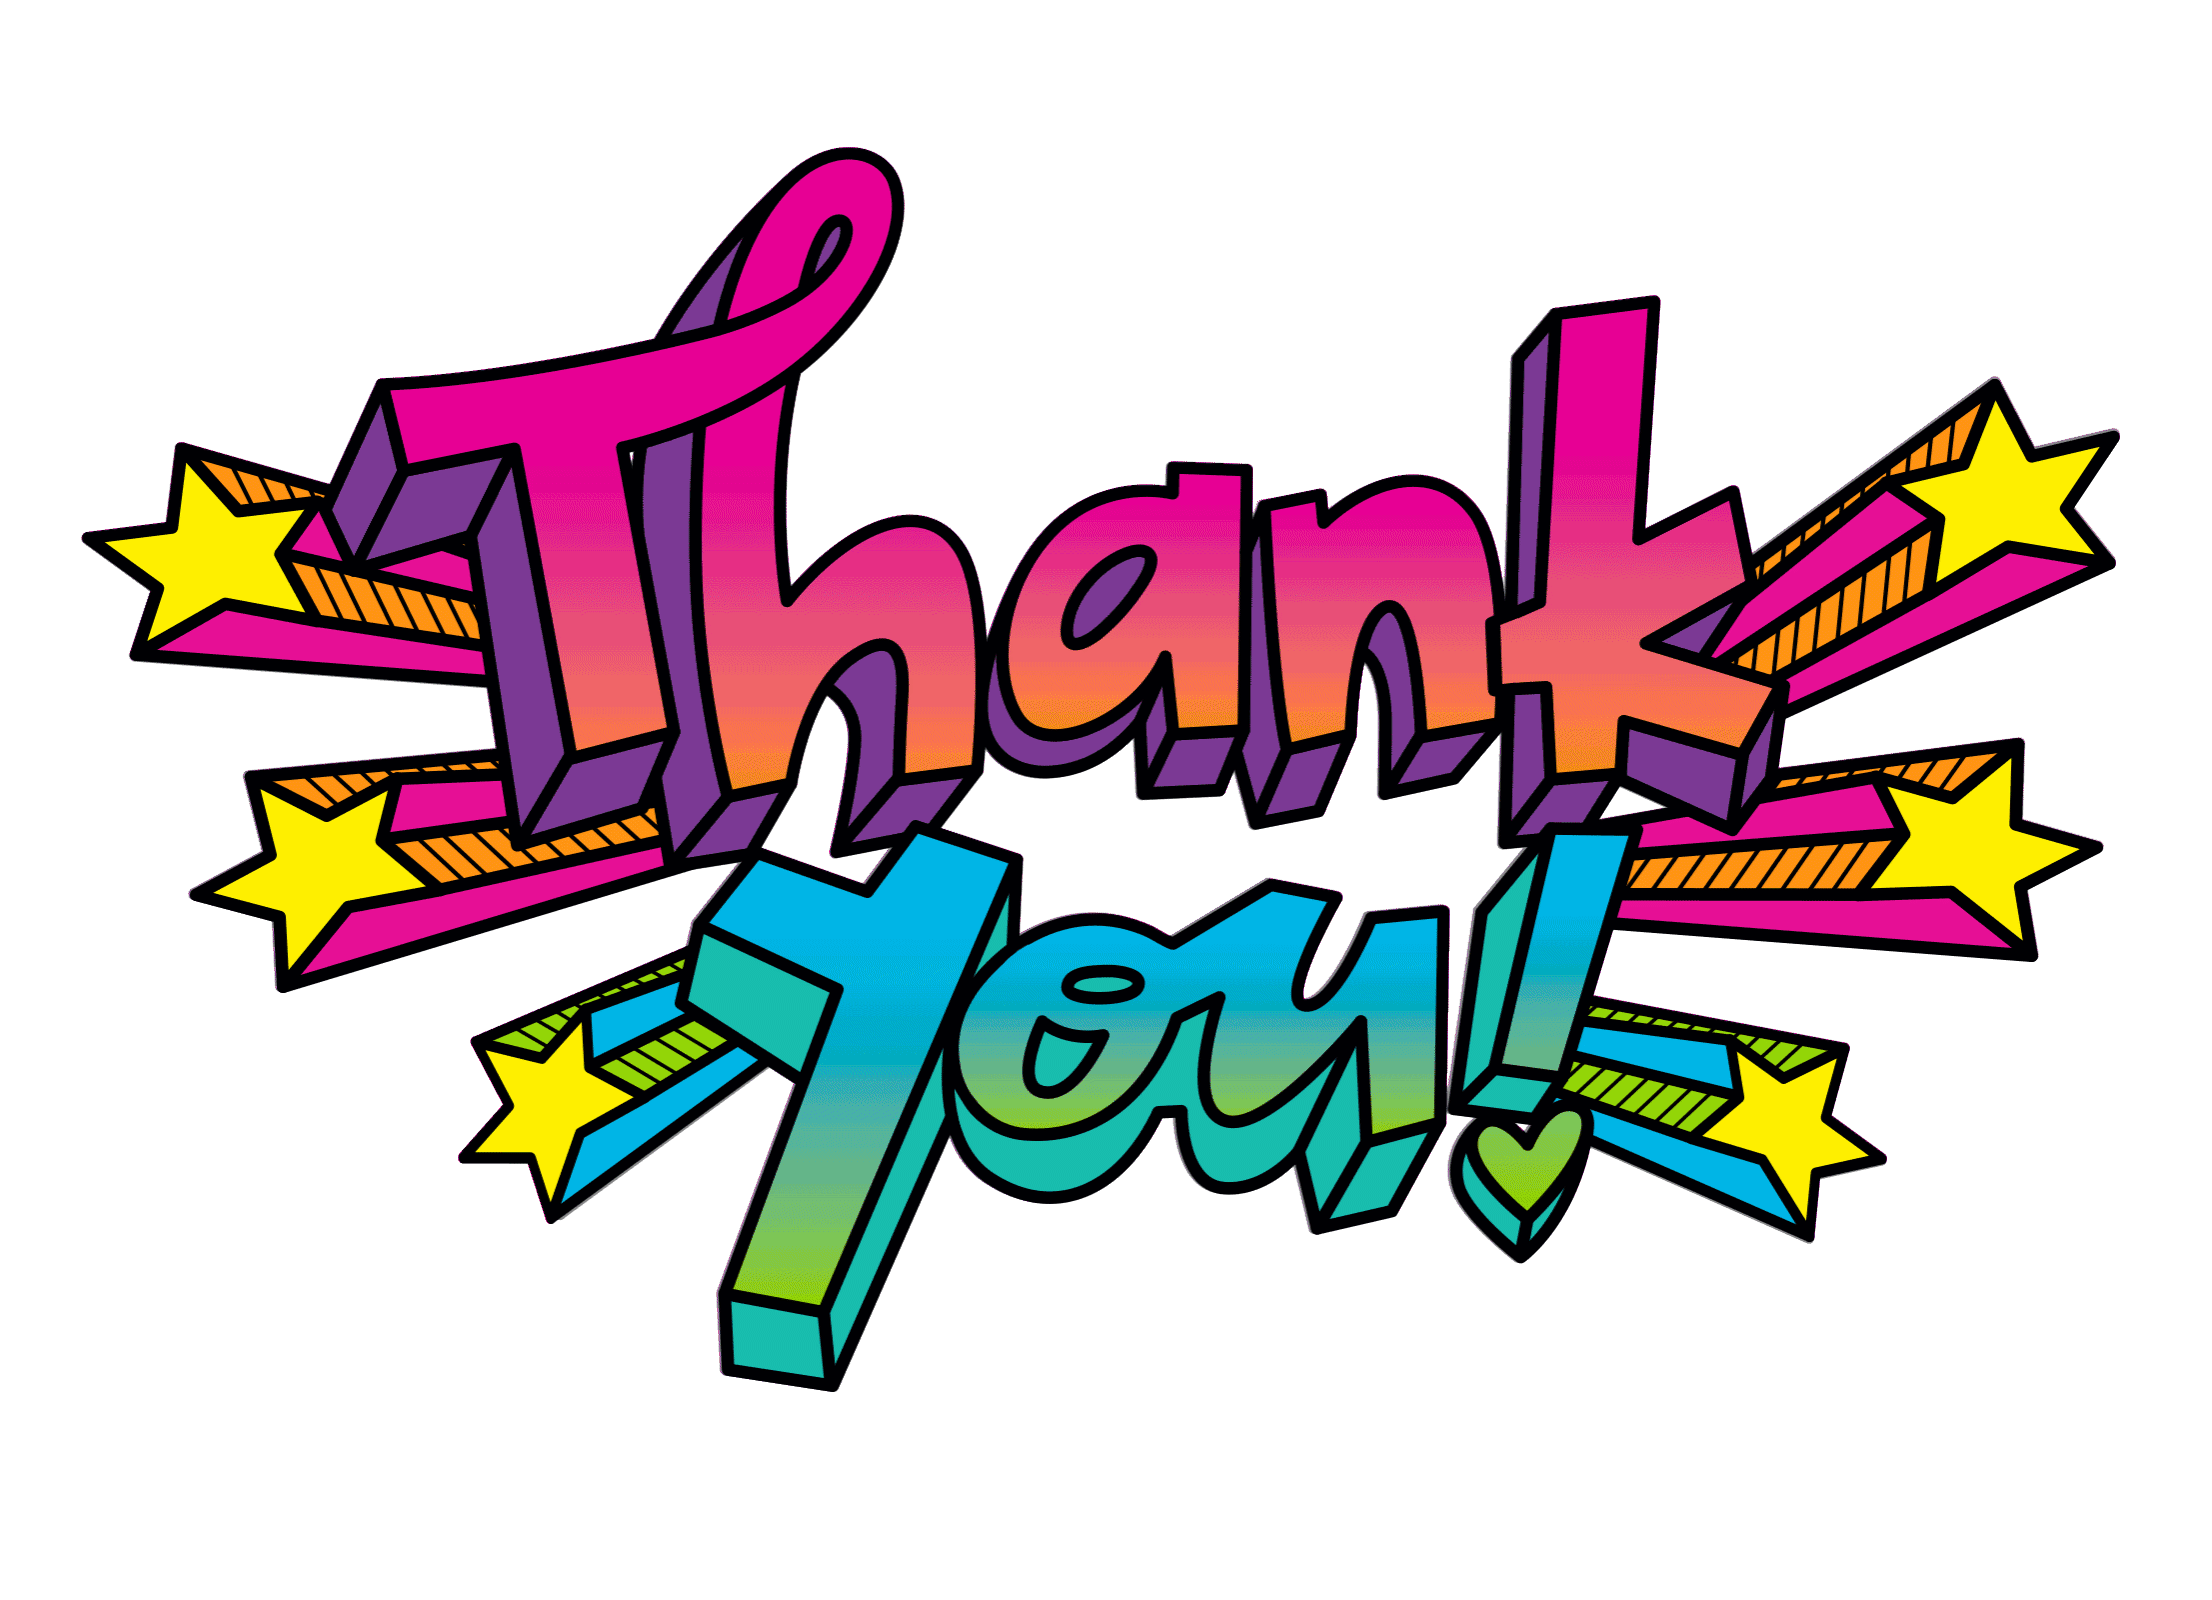 animated thank you images for powerpoint presentations gif